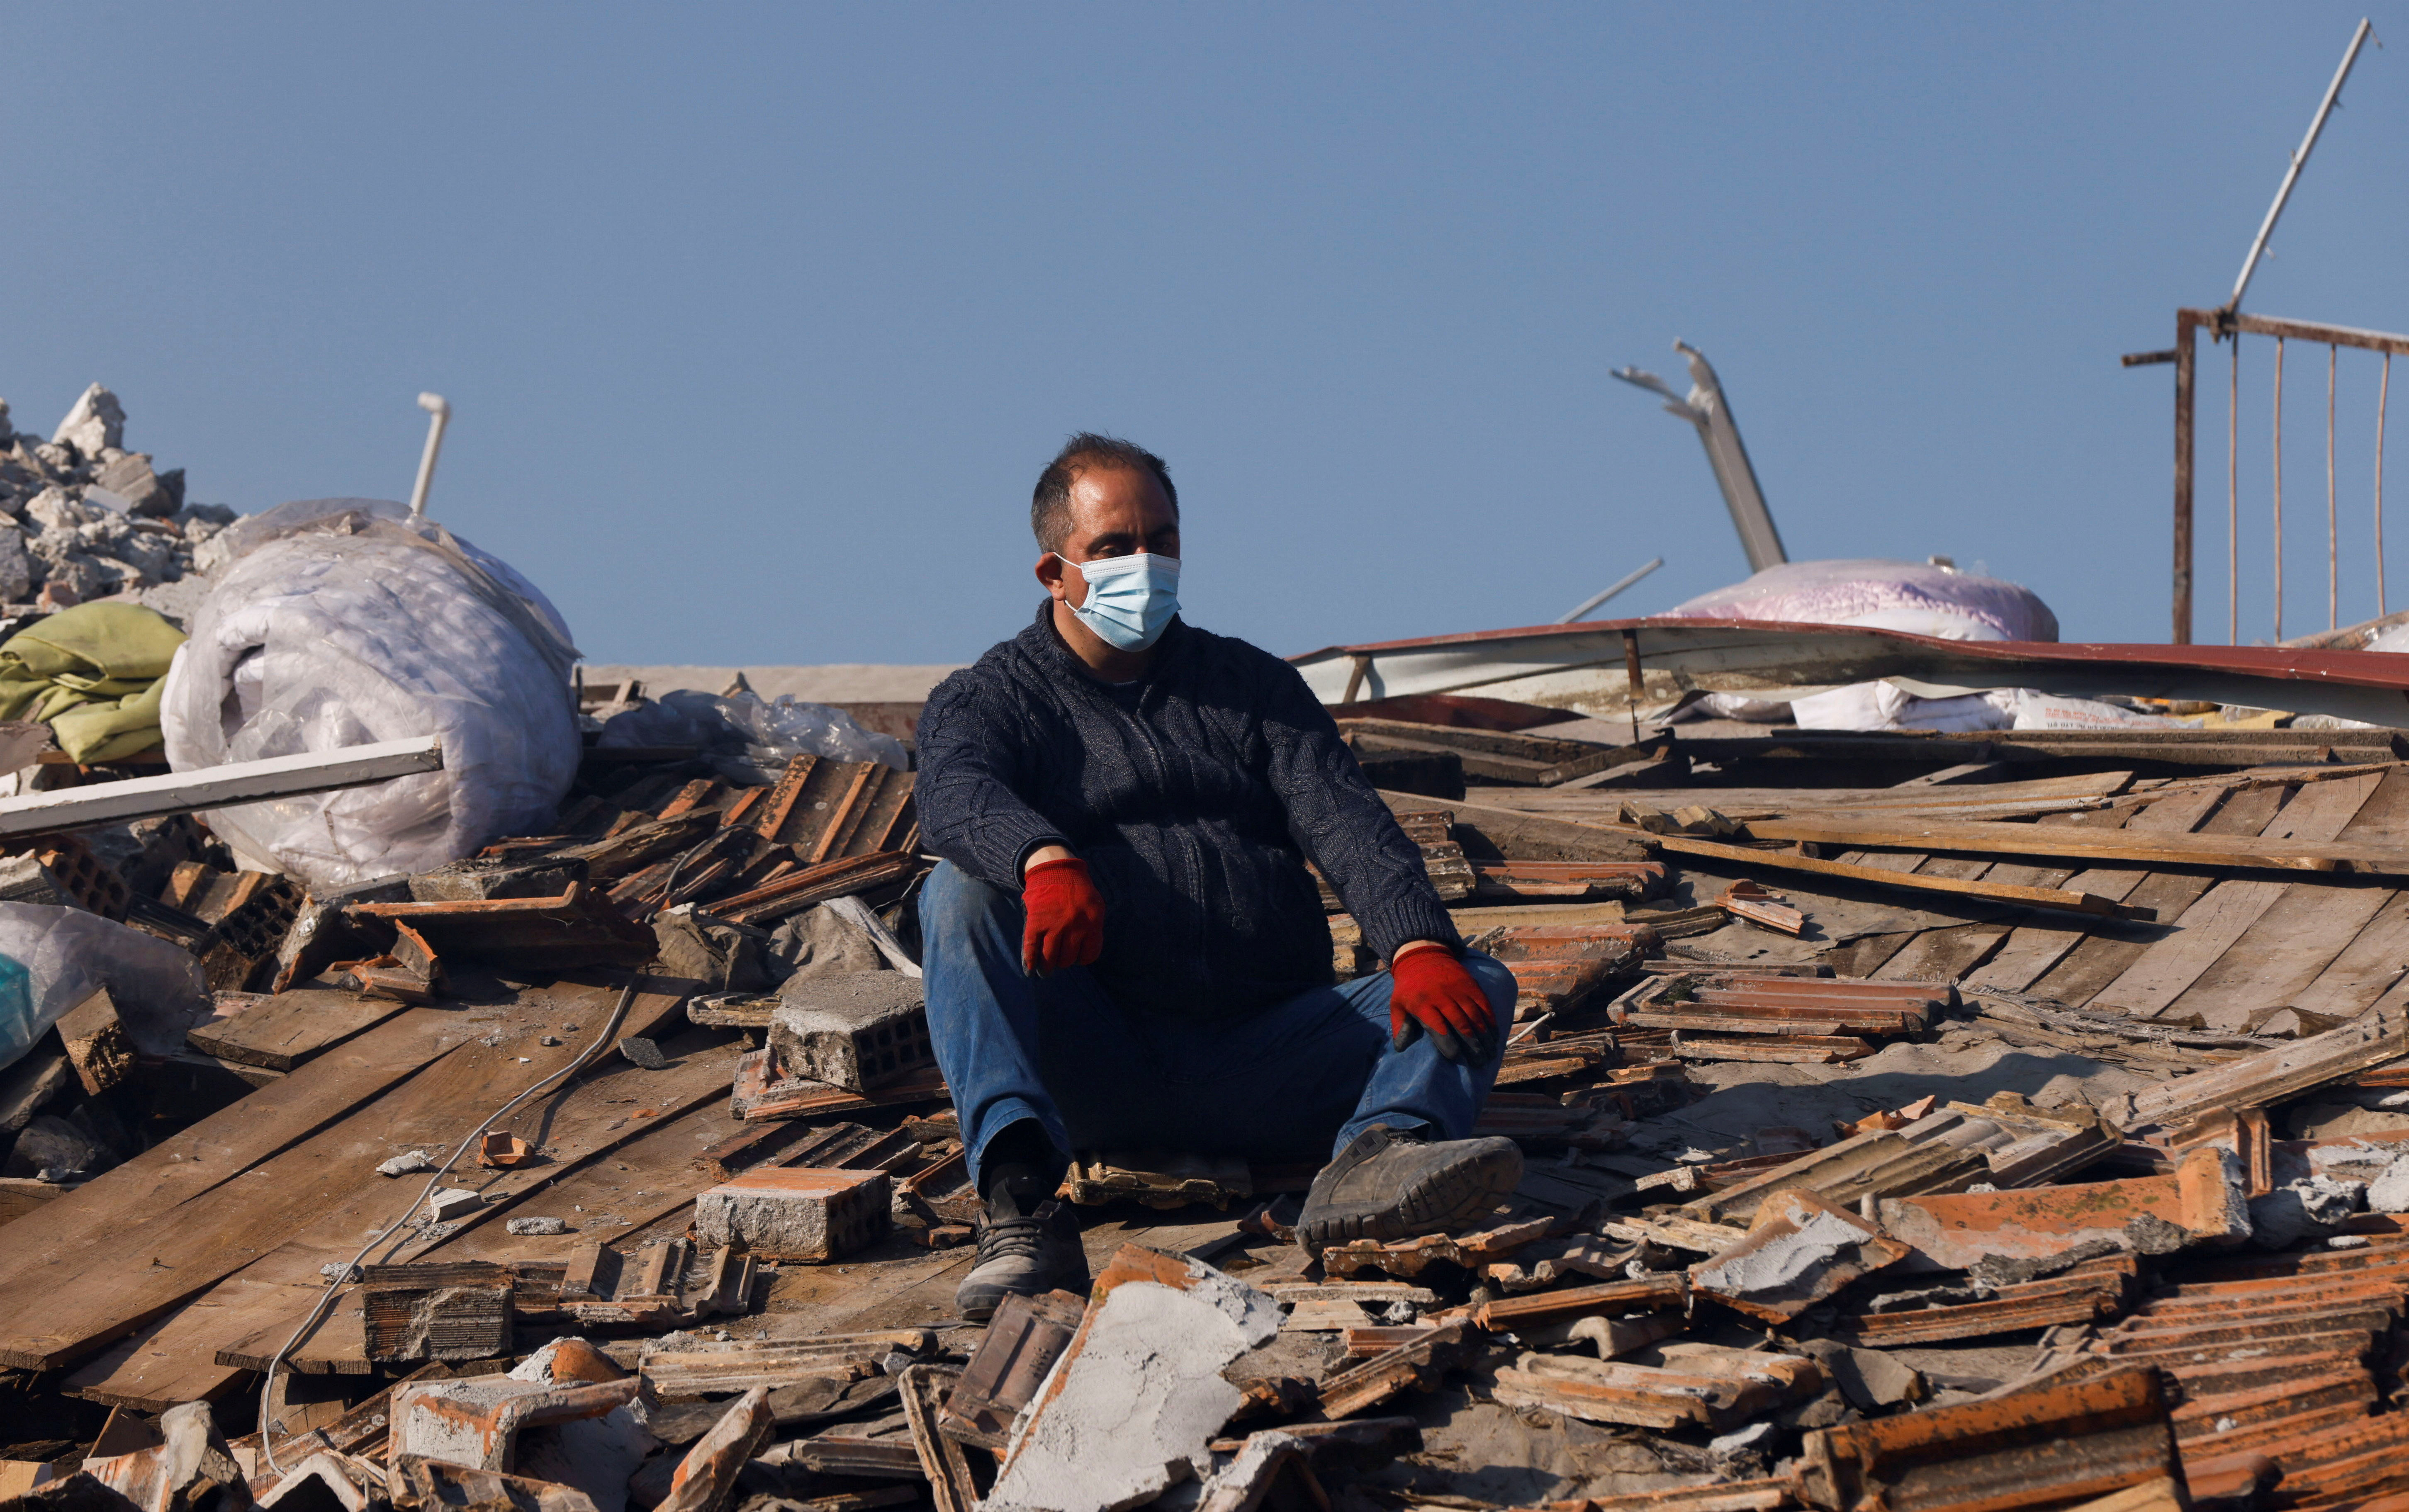 A man sits on what is left of a roof surrounded by rubble following the earthquake in Hatay, Turkey